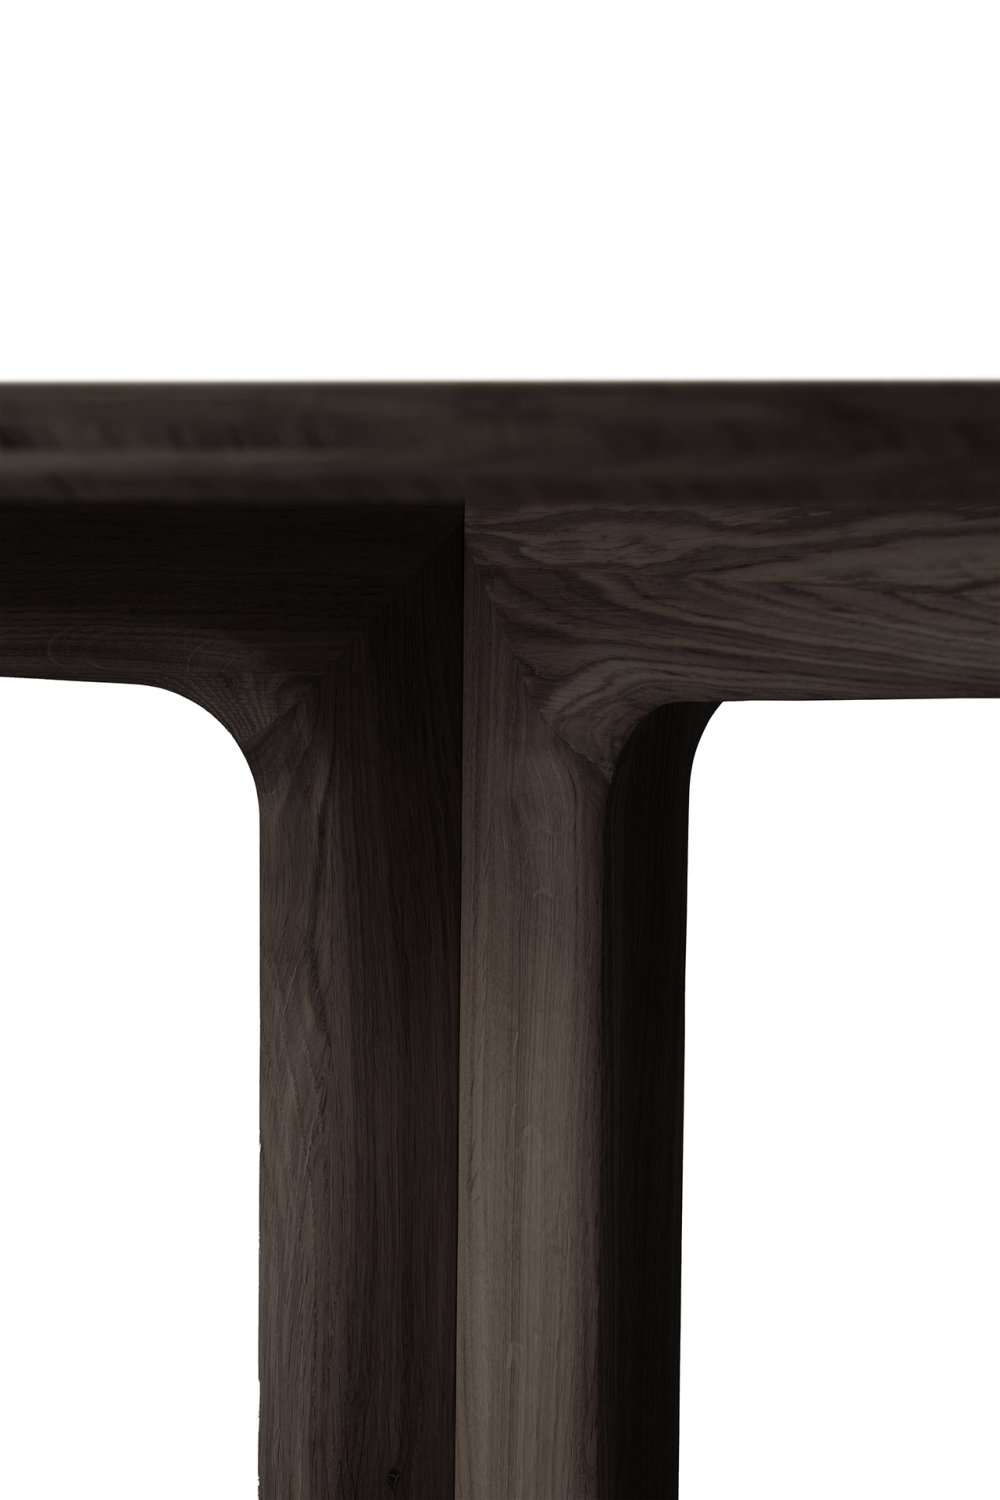 Central-Footed Varnished Oak Dining Table | Ethnicraft Corto | Oroa.com